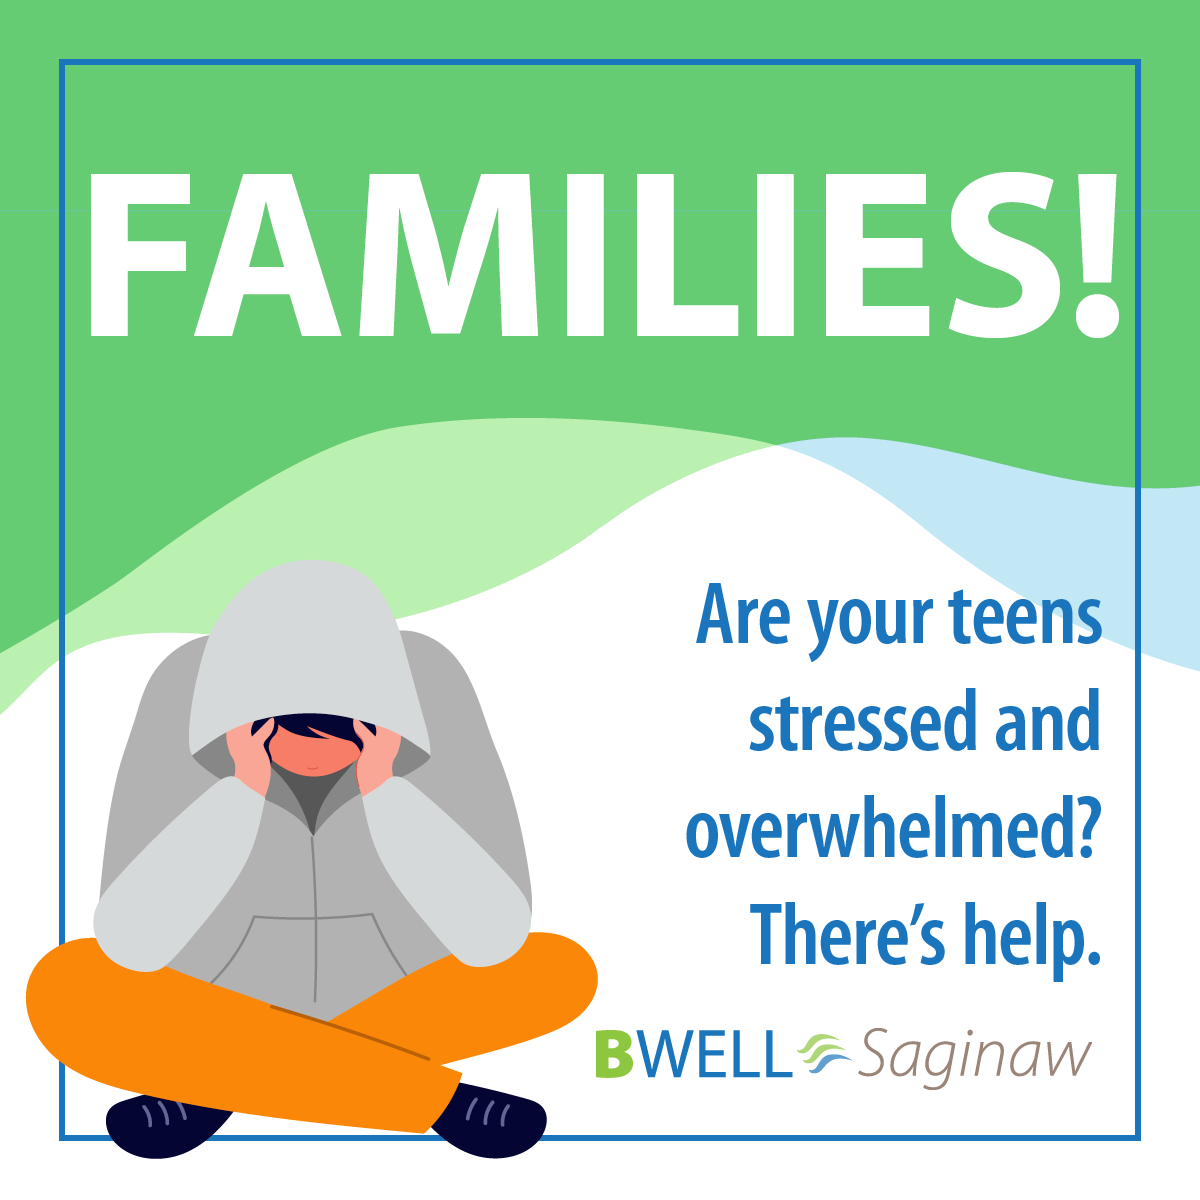 Are your teens stressed and overwhelmed? There’s help.